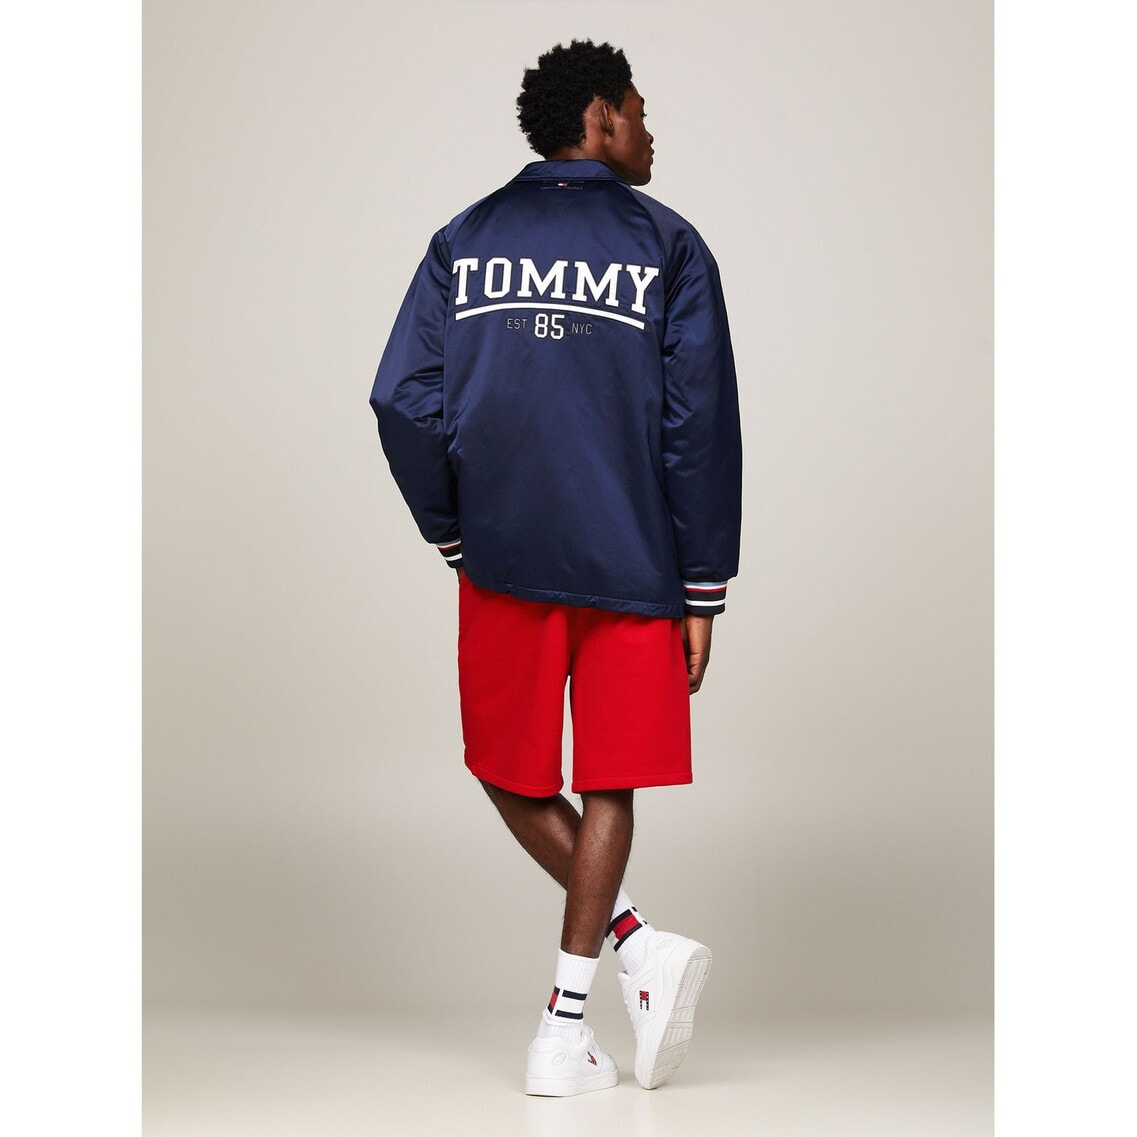 TOMMY COLLECTION ロングバーシティコーチジャケット | TOMMY HILFIGER 